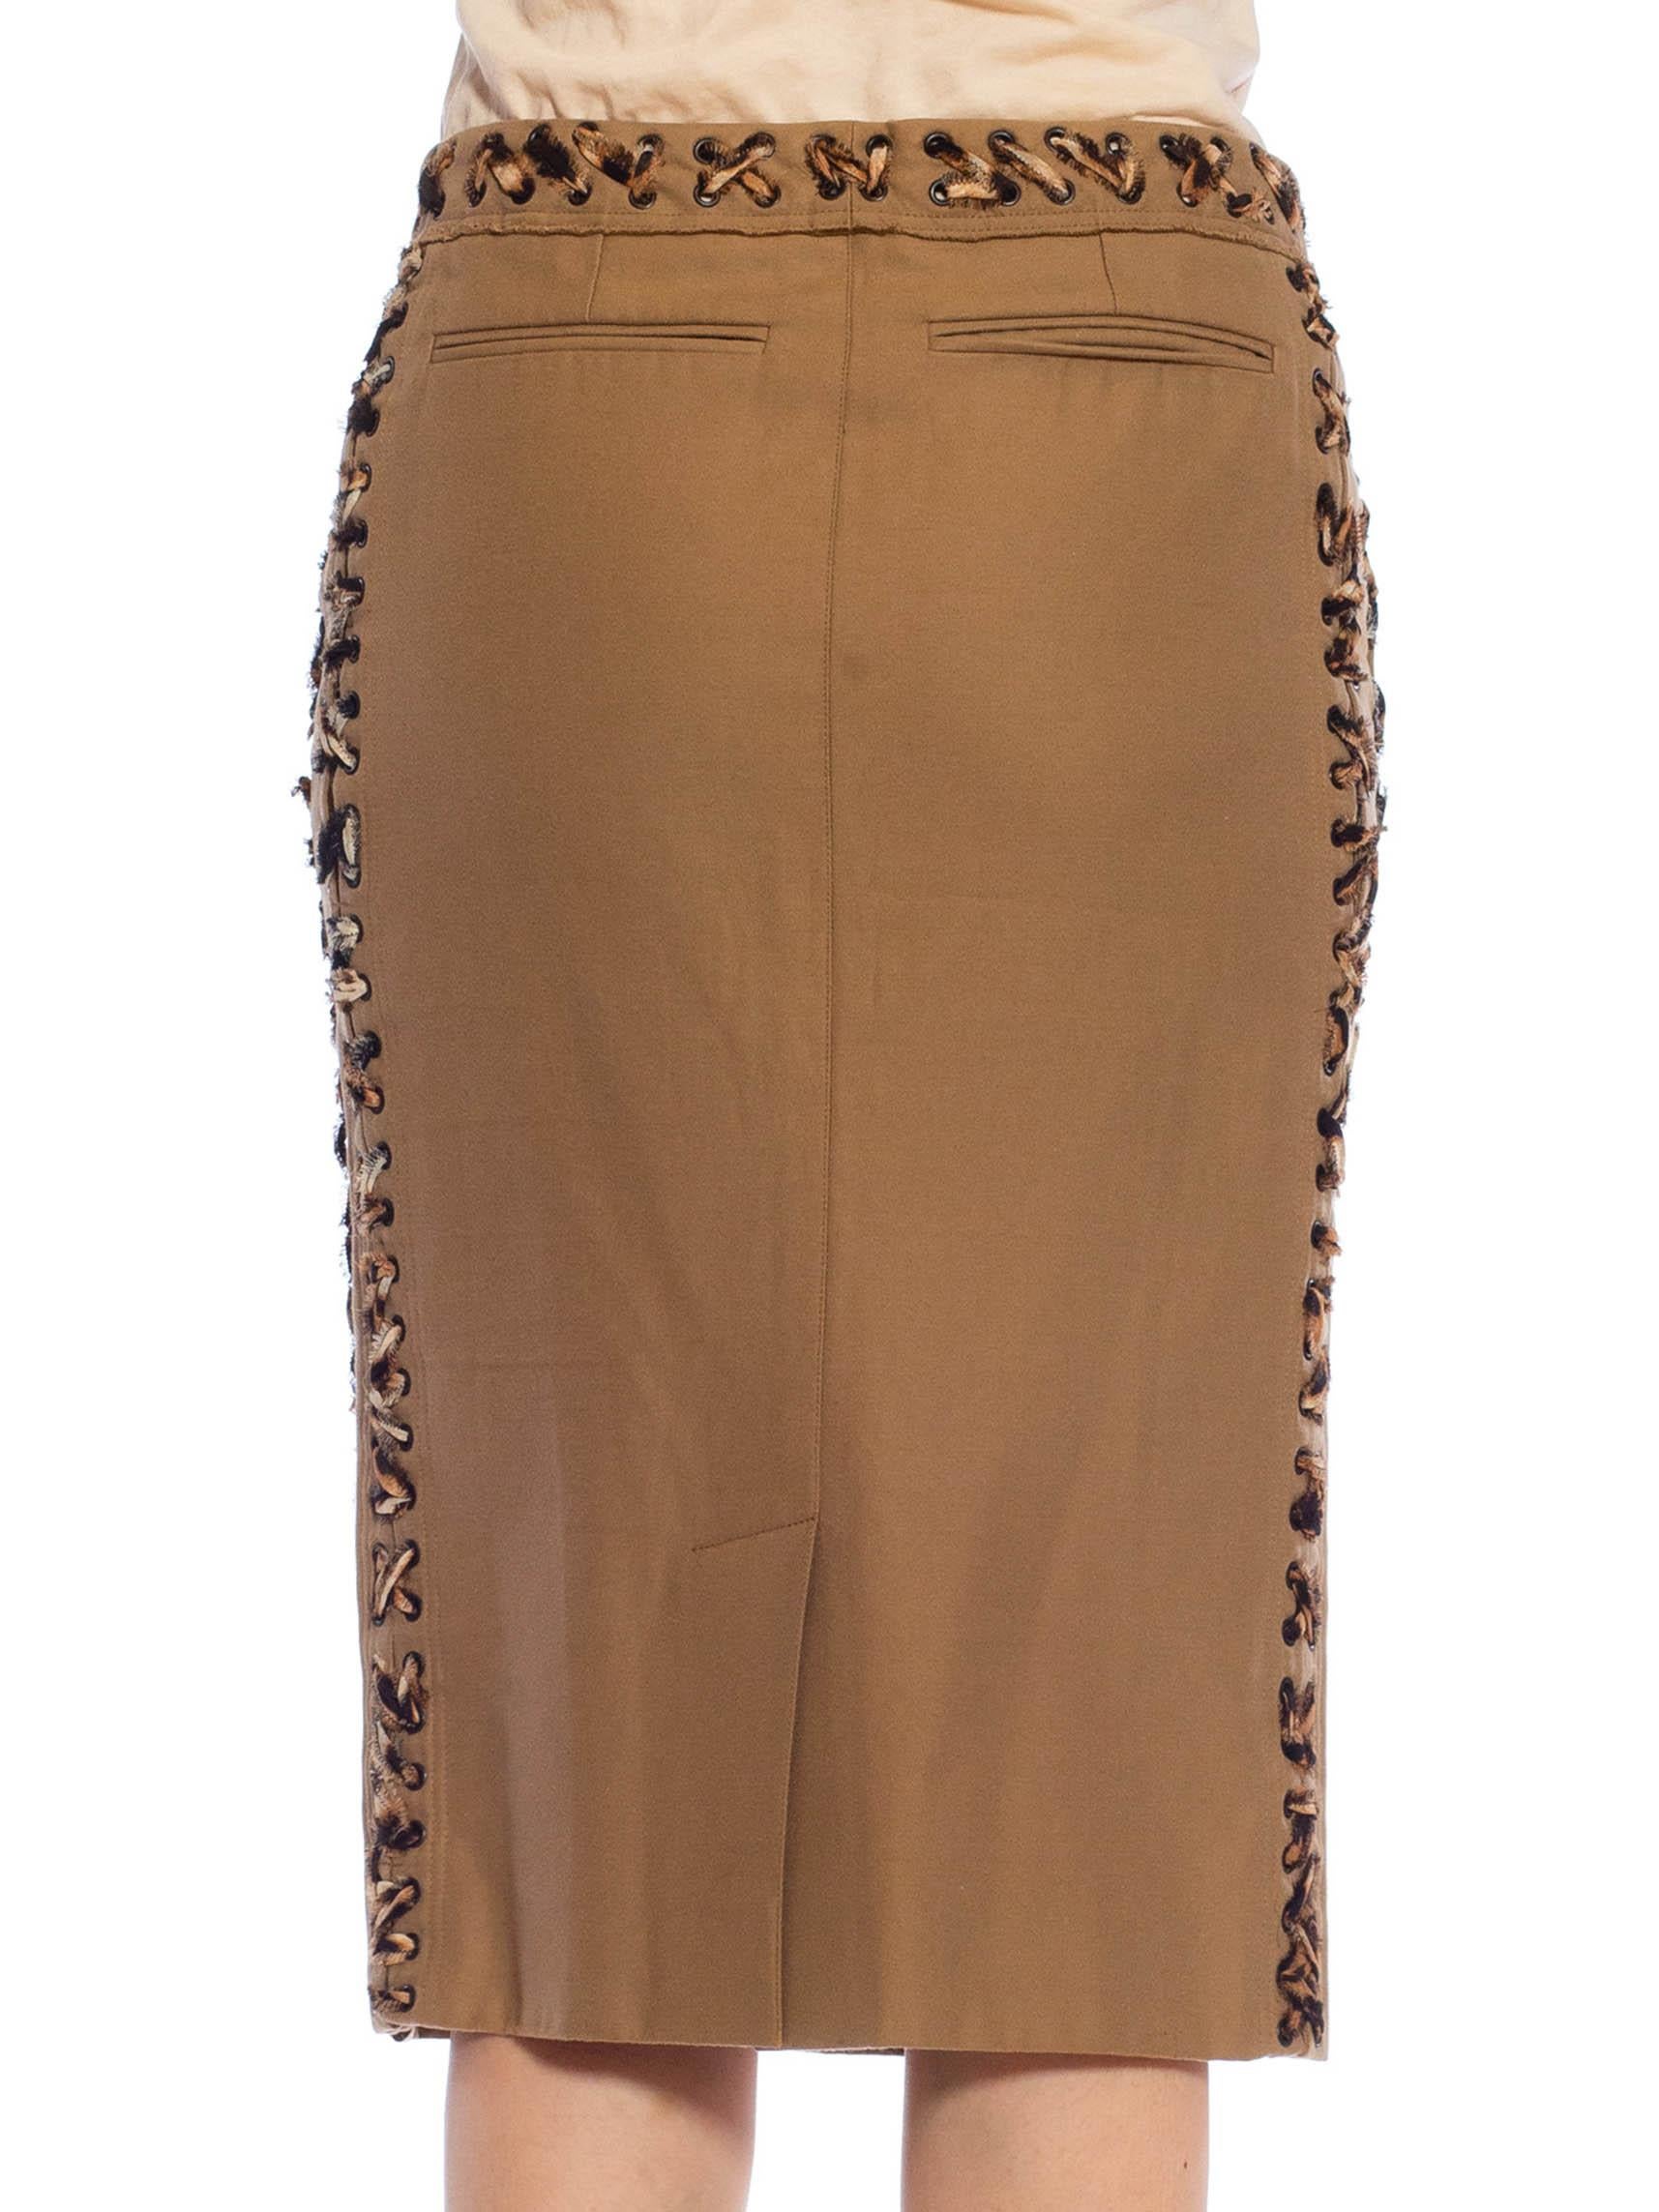 2000S YVES SAINT LAURENT Brown Cotton Tom Ford Safari Collection Skirt In Excellent Condition For Sale In New York, NY